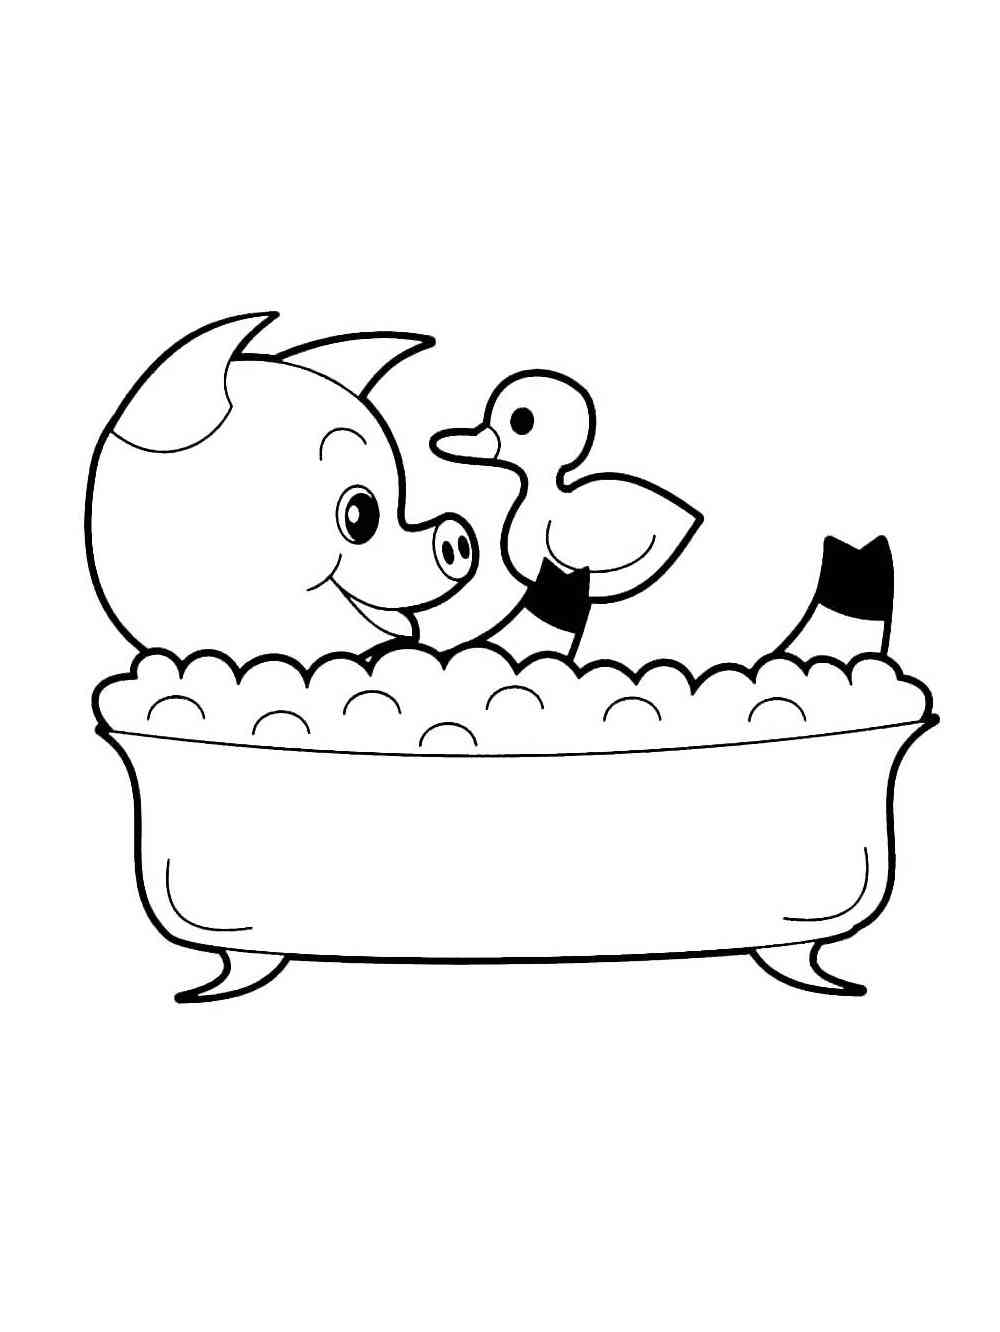 Baby Pig in the bathtub coloring page